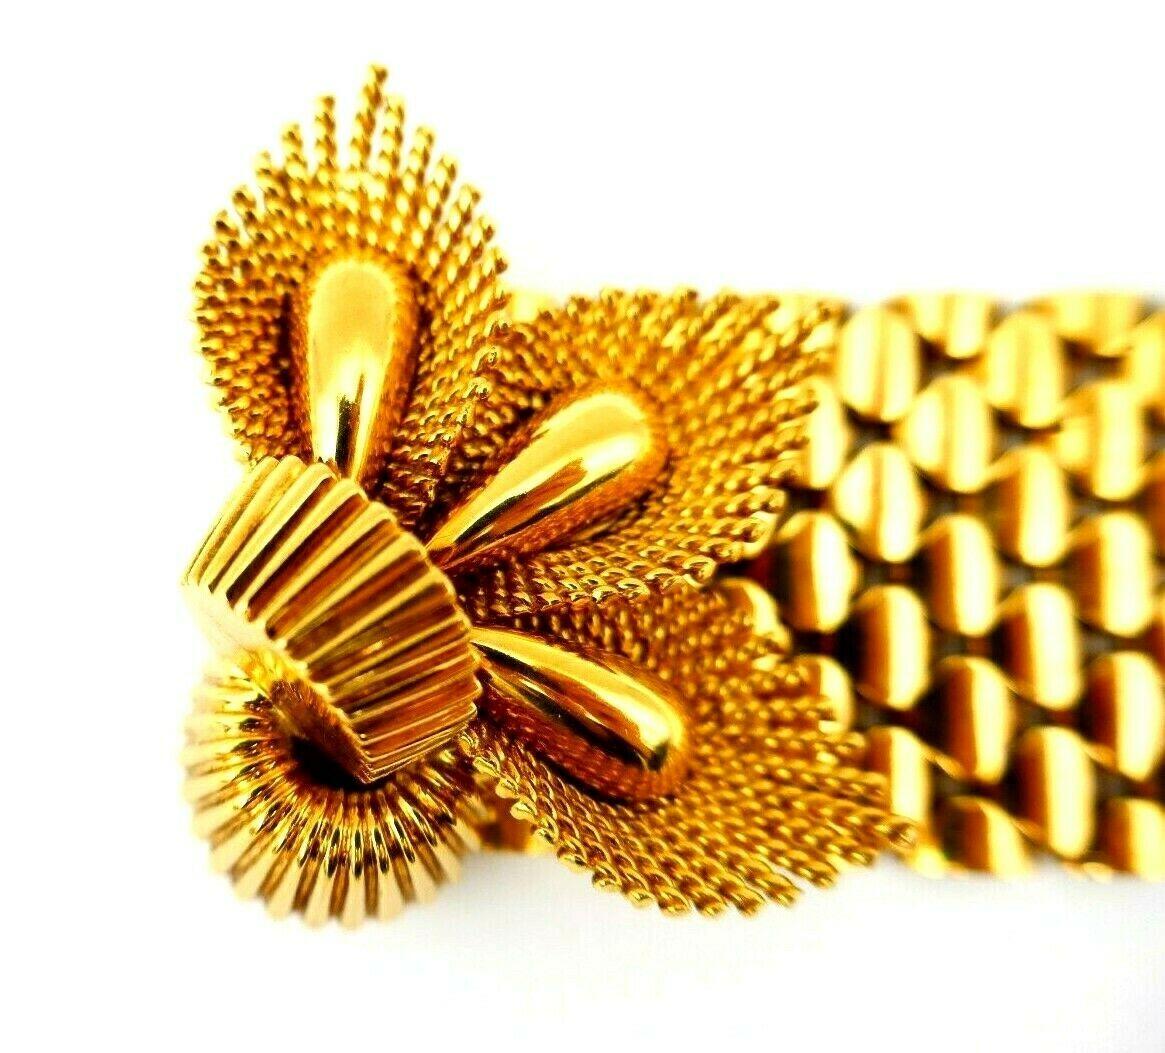 A gorgeous 18k yellow gold Retro bracelet by Kutchinsky. A smooth texture of the gold scales is in contrast with the textured flower-shape buckle. Because of the buckle closure the bracelet's size is adjustable to any length.
Stamped with Kutchinsky